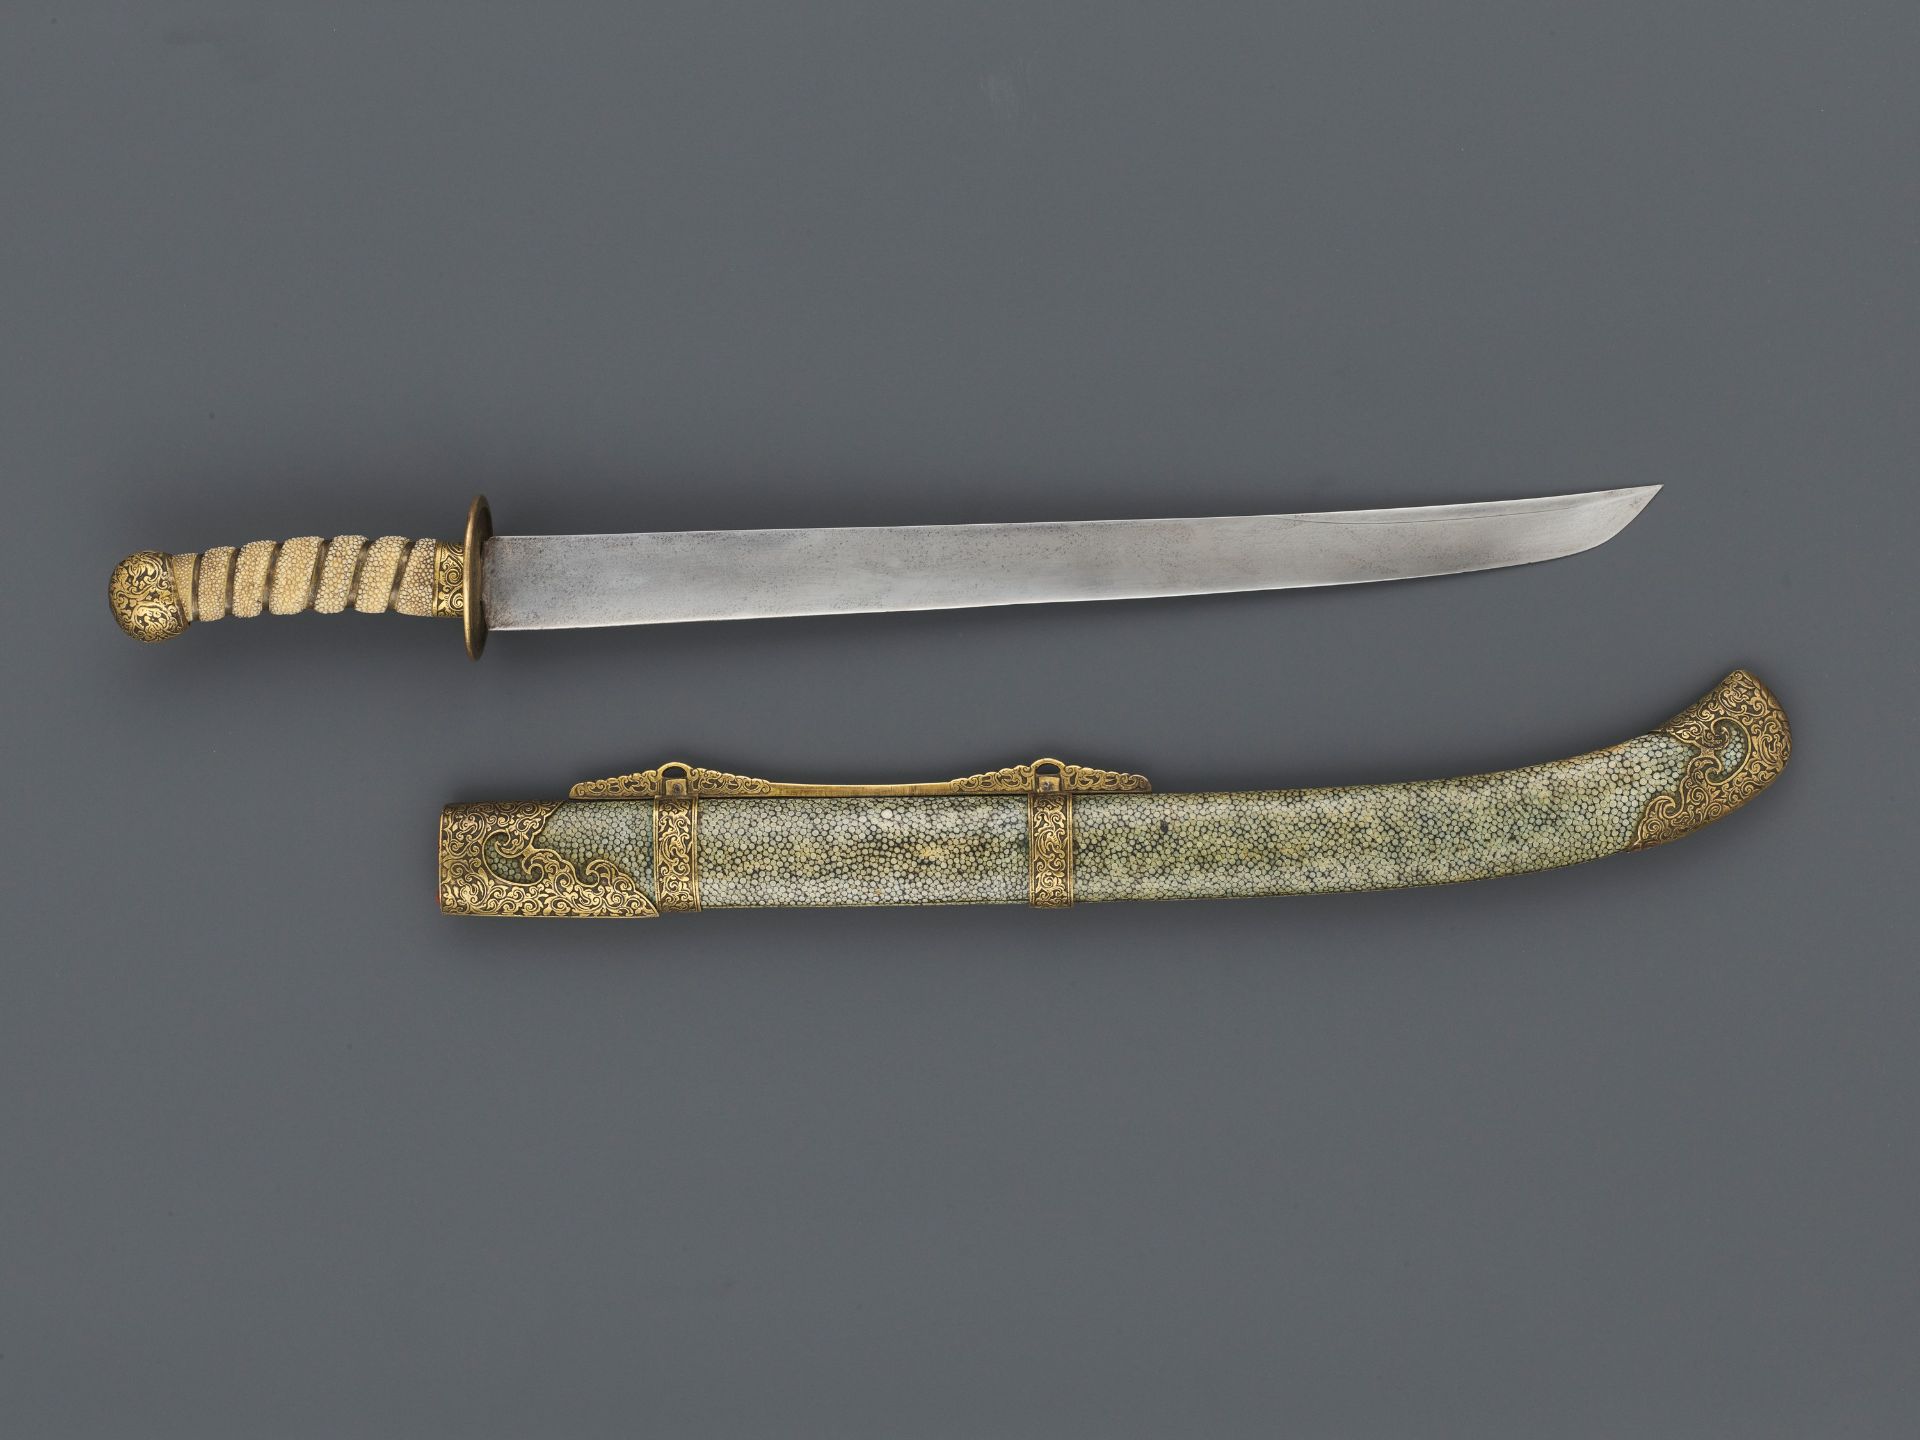 A CEREMONIAL SWORD AND SCABBARD, QING DYNASTY